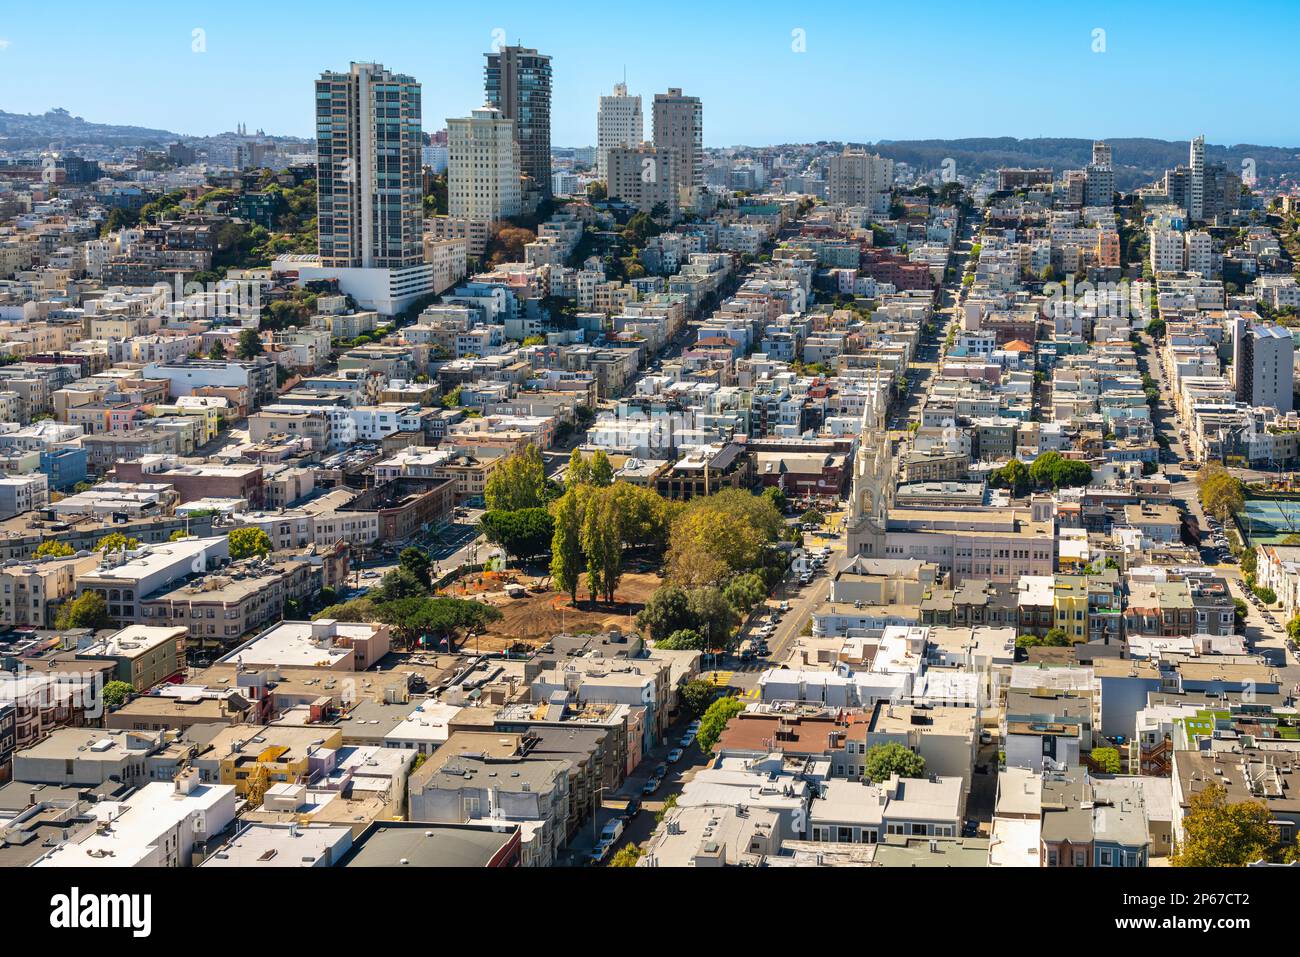 Elevated view of Russian Hill neighborhood and Washington Square seen from Coit Tower, San Francisco, California, United States of America Stock Photo